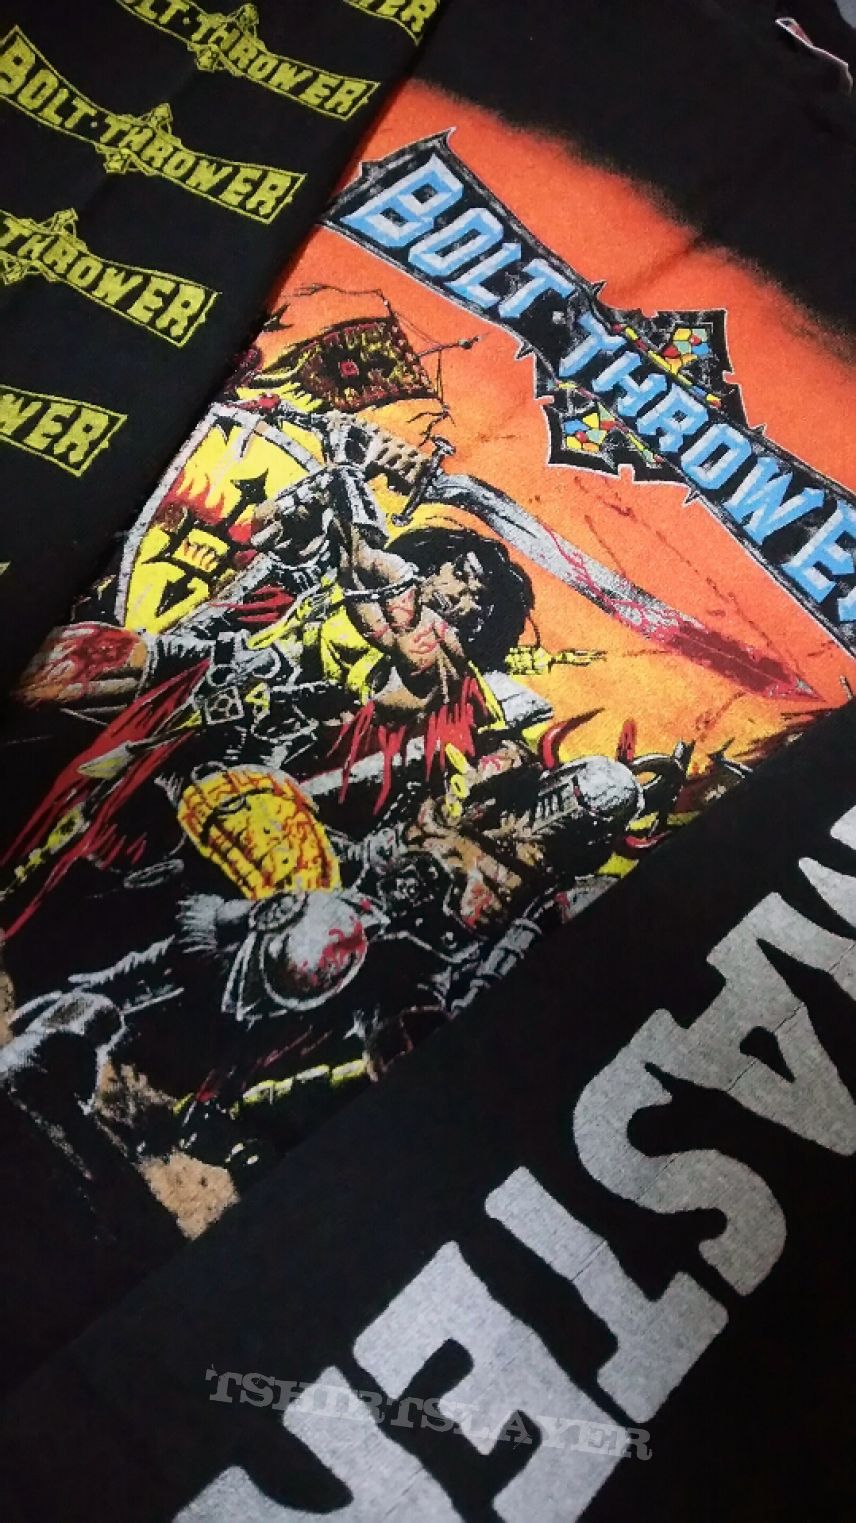 SOLD- Bolt Thrower - Warmaster Long Sleeve 